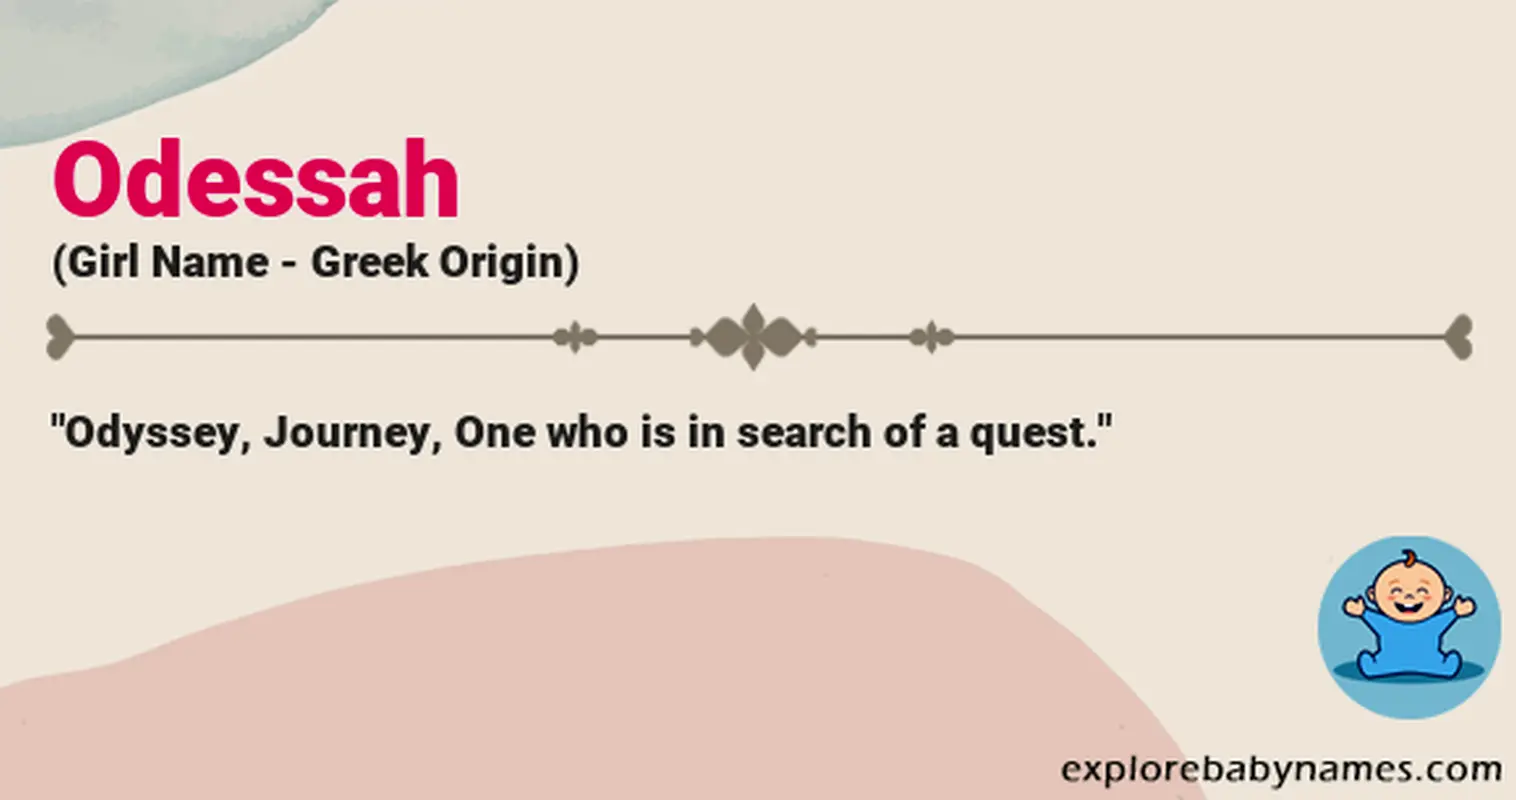 Meaning of Odessah